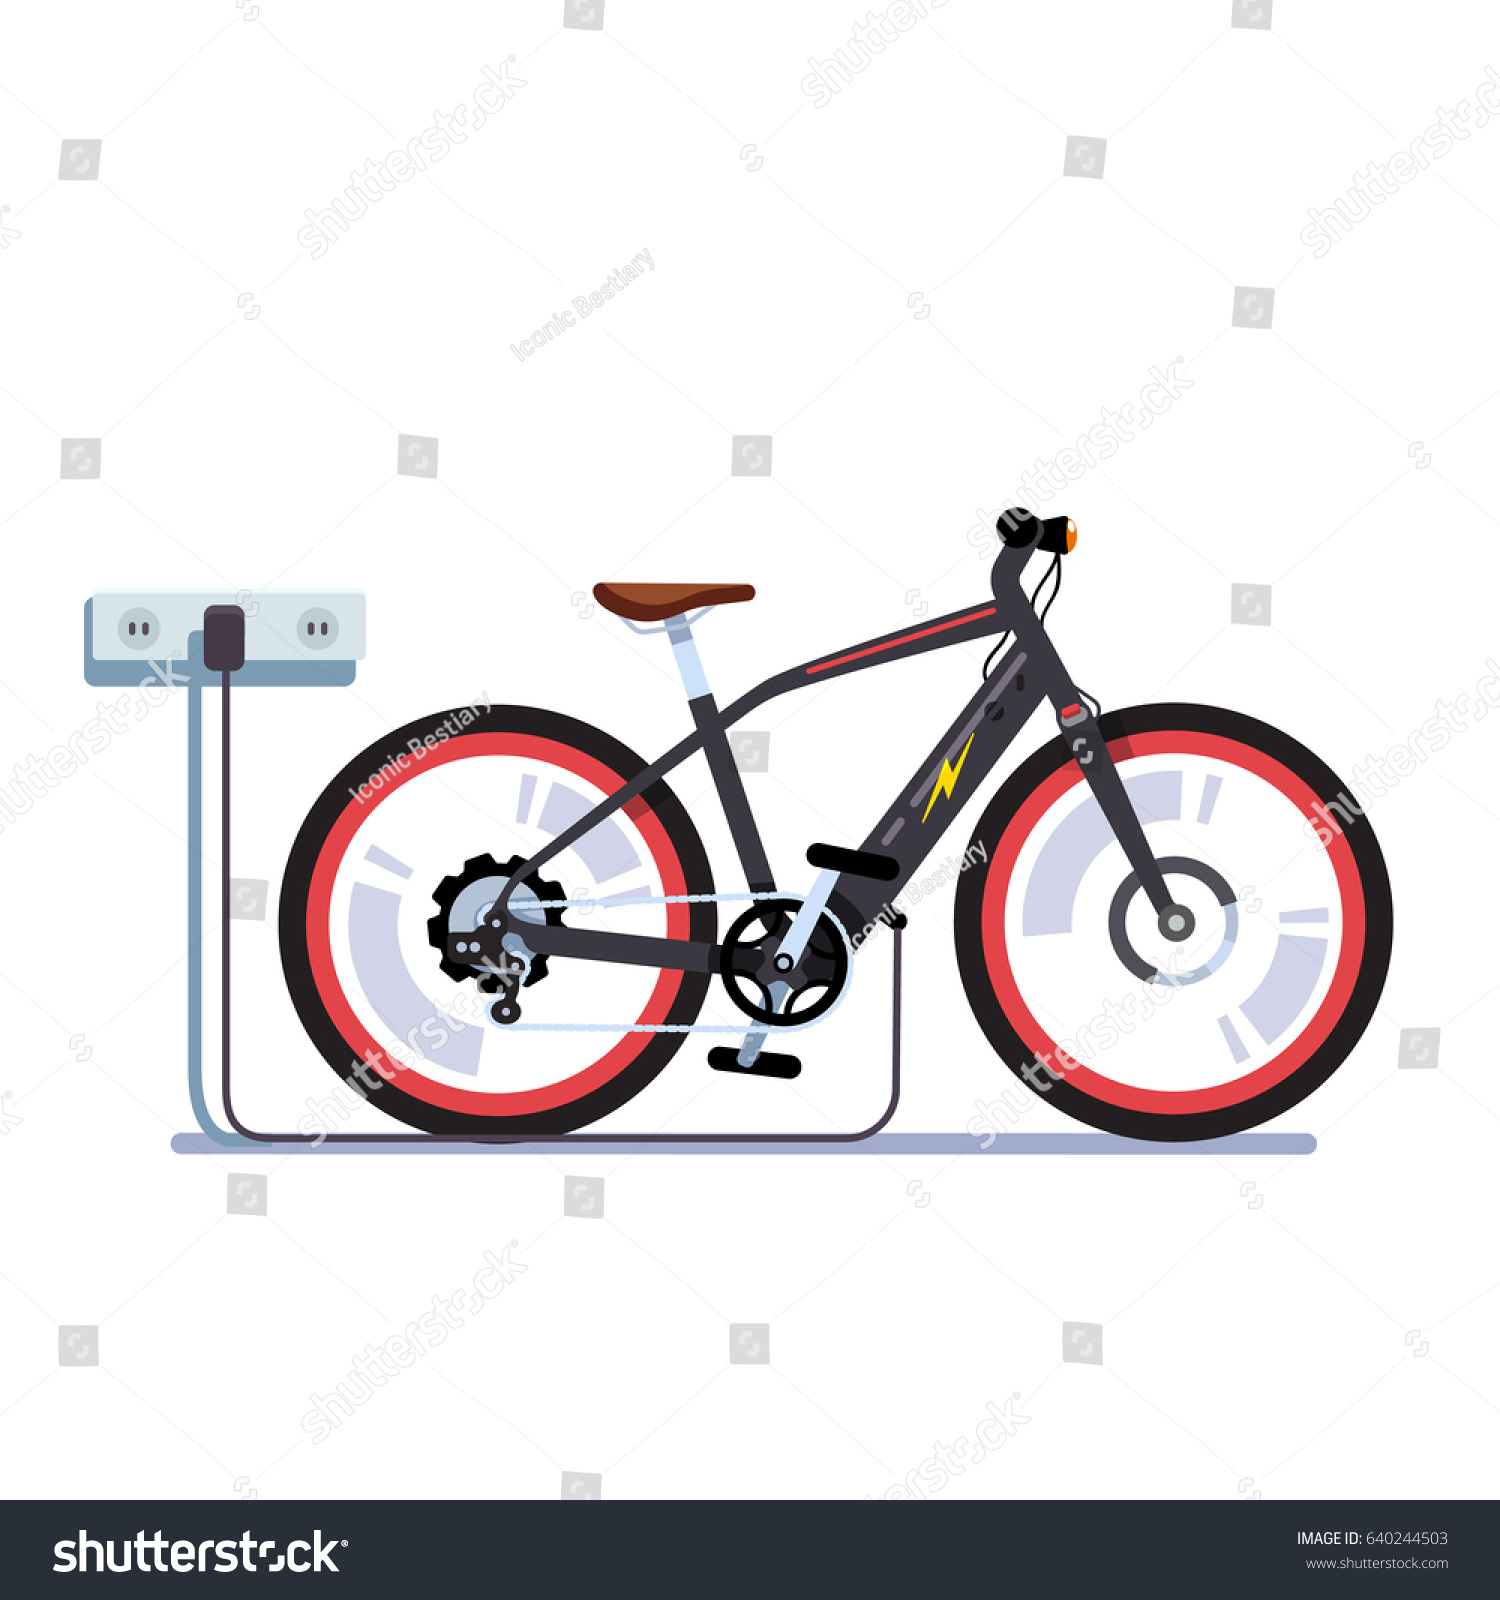 bicycle outlet